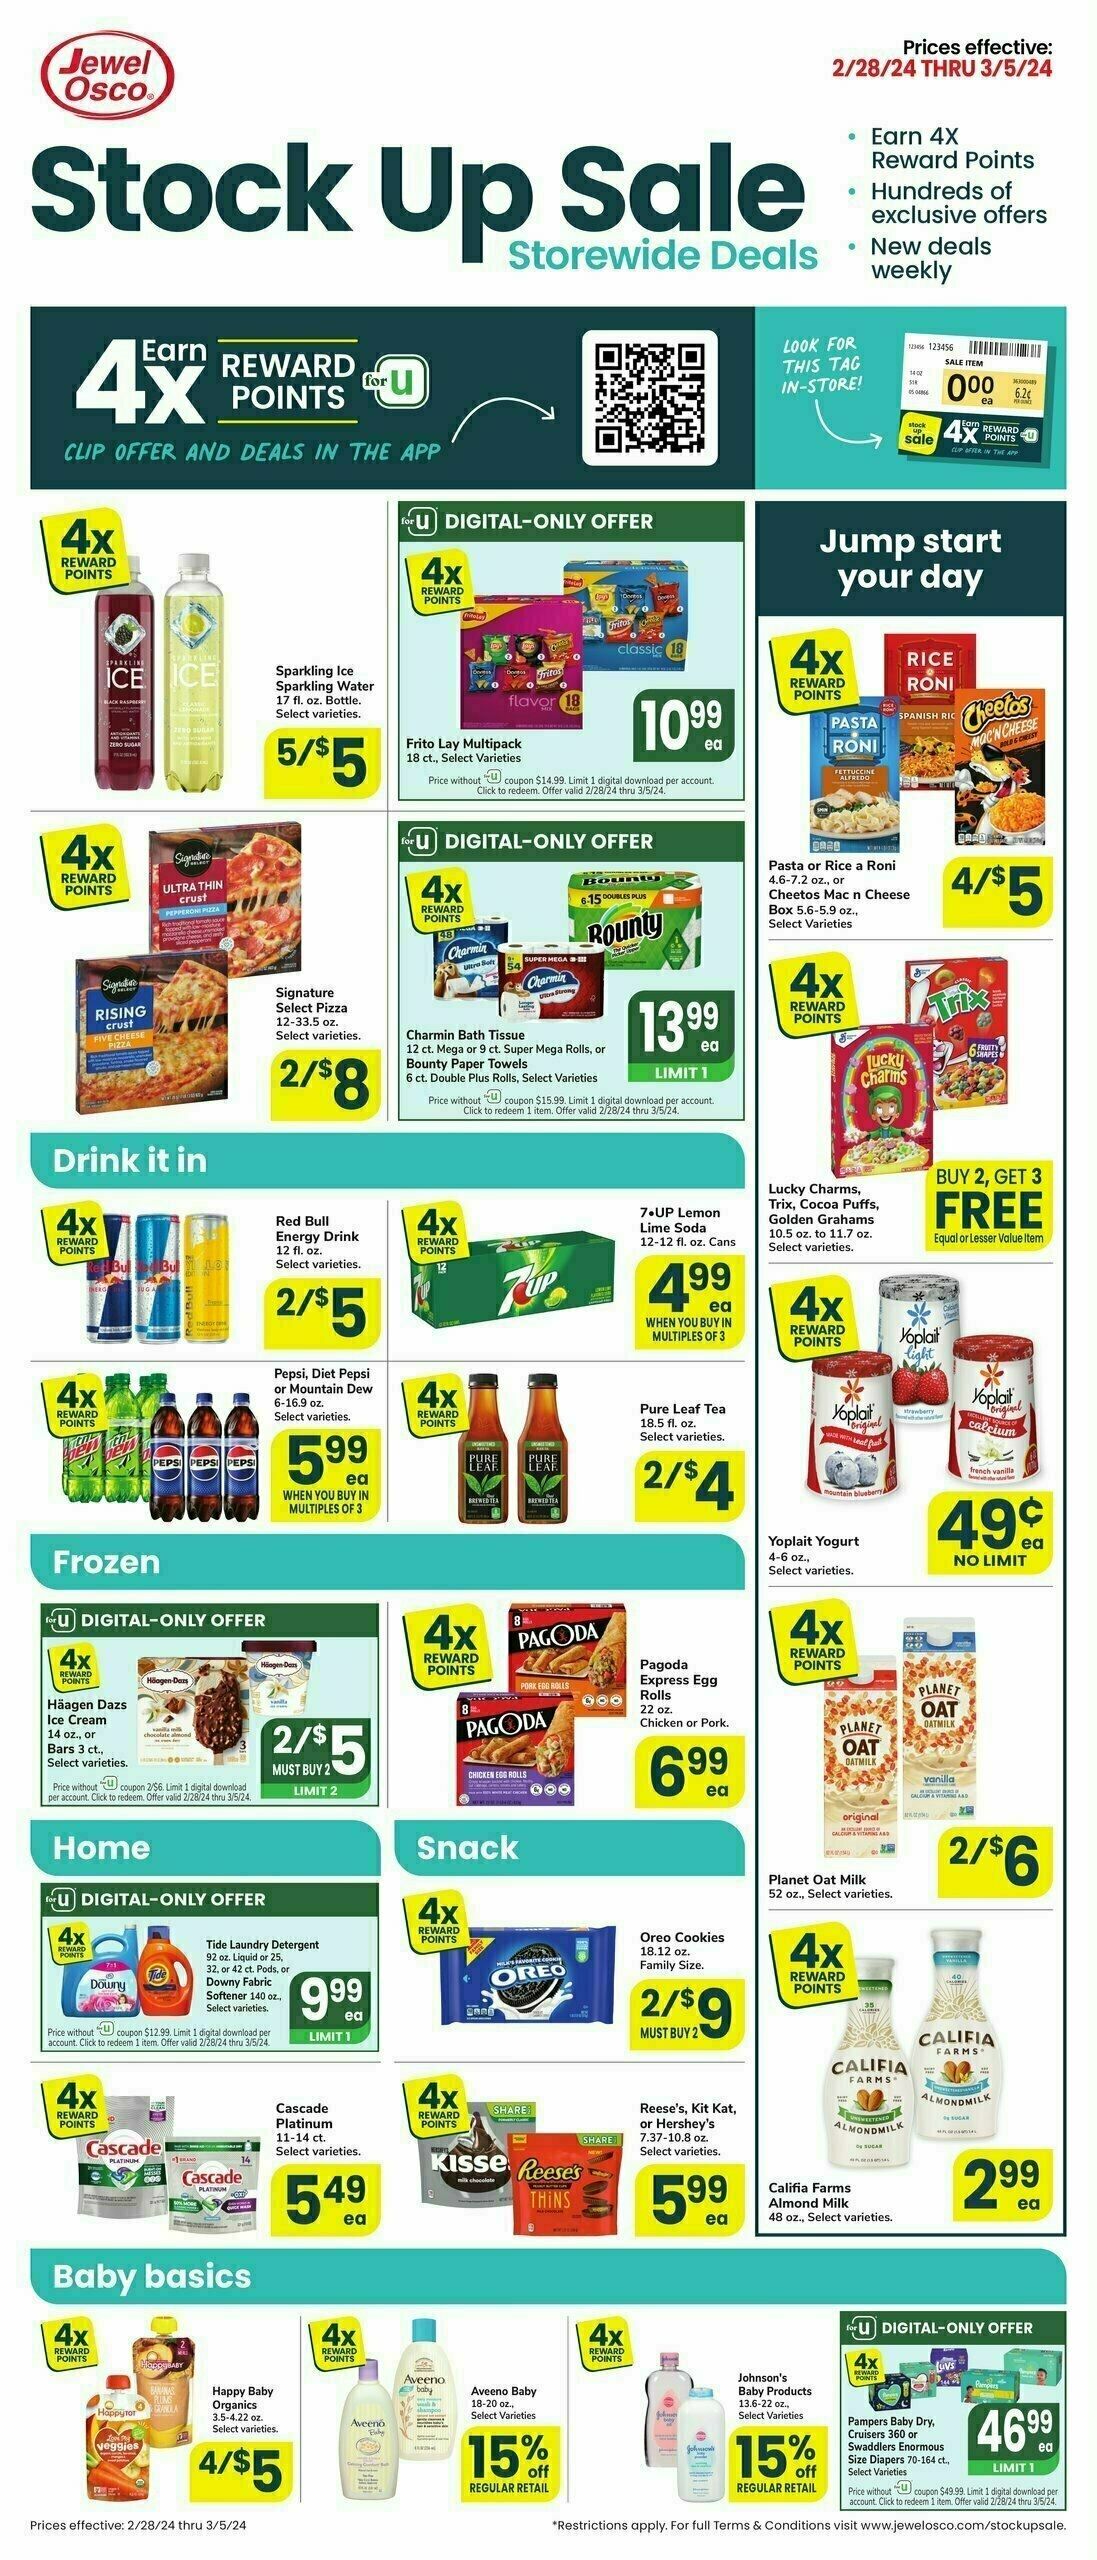 Jewel Osco Stock Up Sale Weekly Ad from February 28